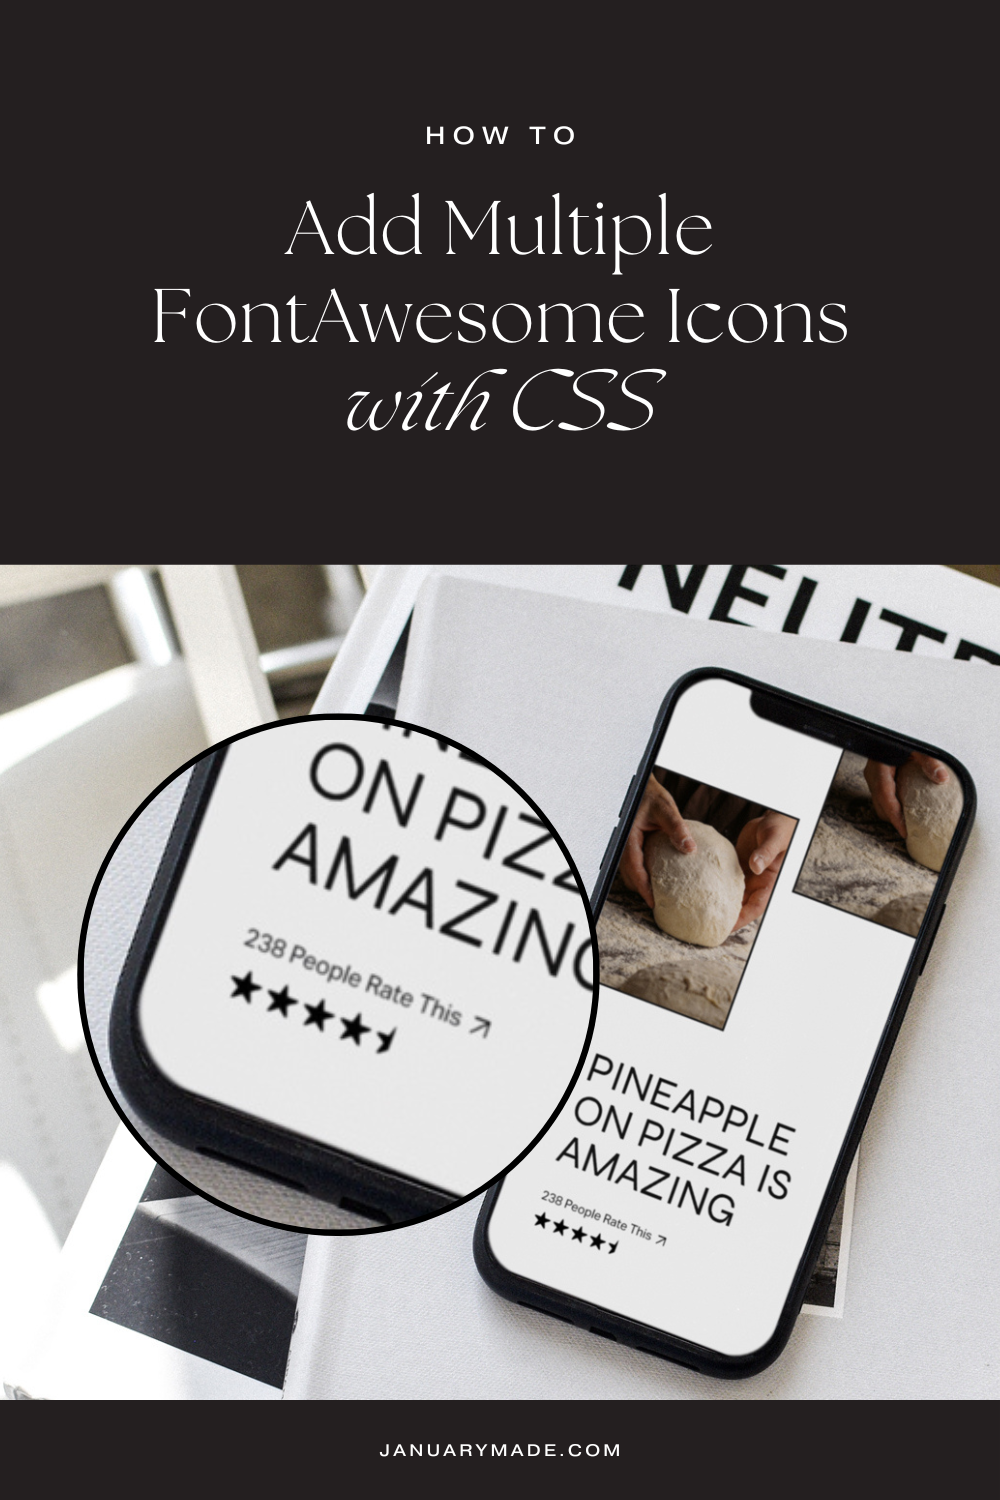 How To Add Multiple FontAwesome Icons with CSS